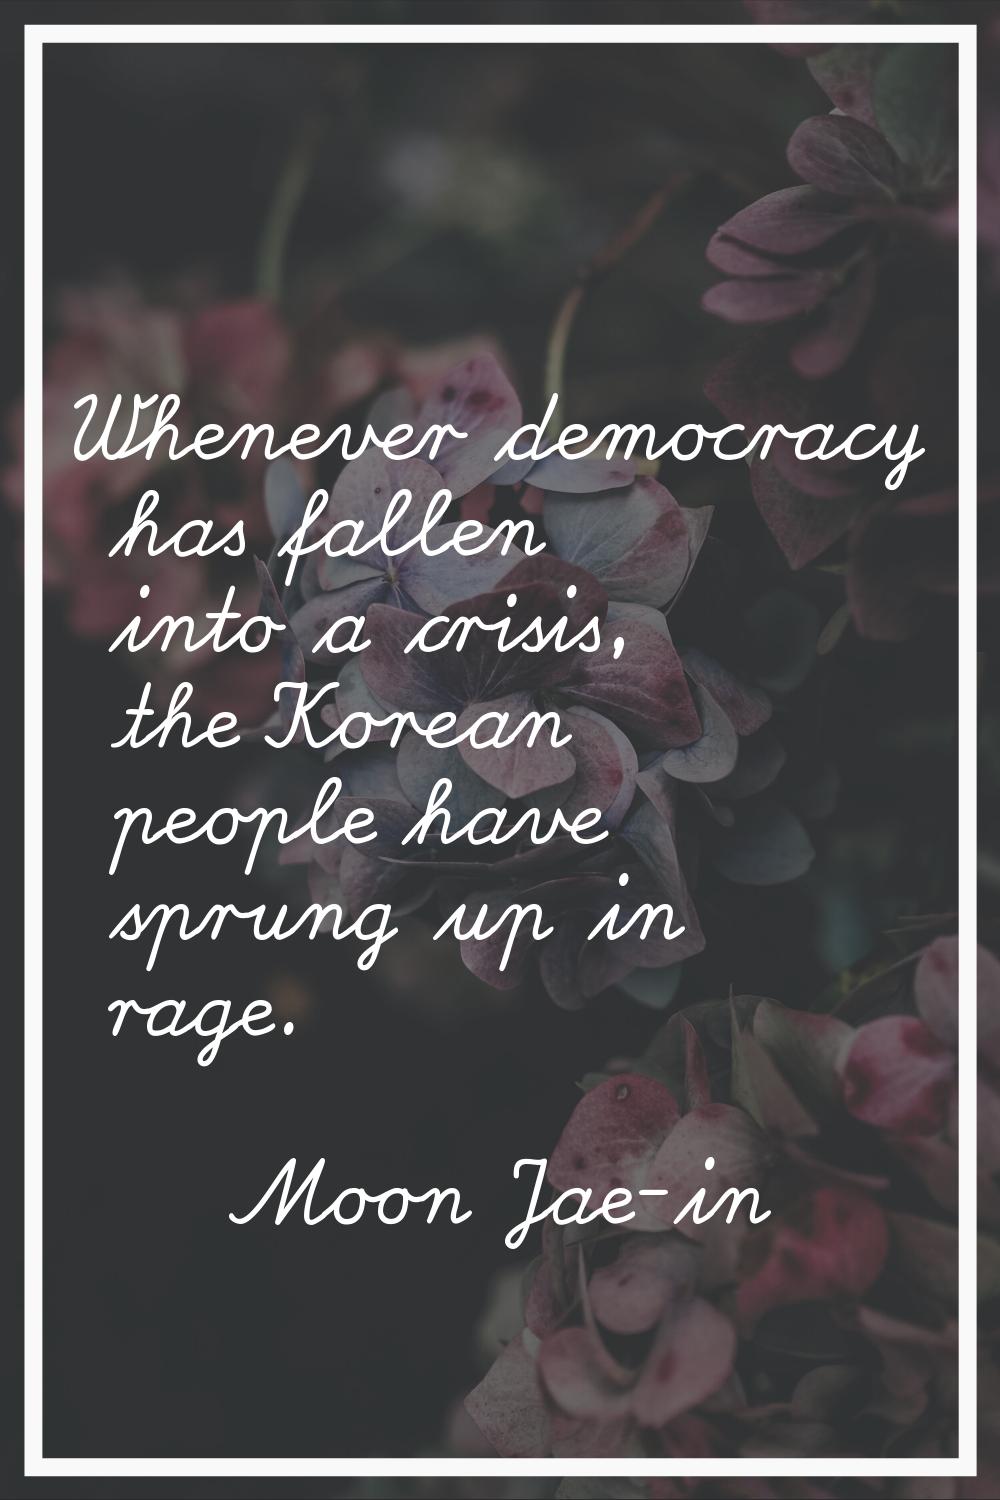 Whenever democracy has fallen into a crisis, the Korean people have sprung up in rage.